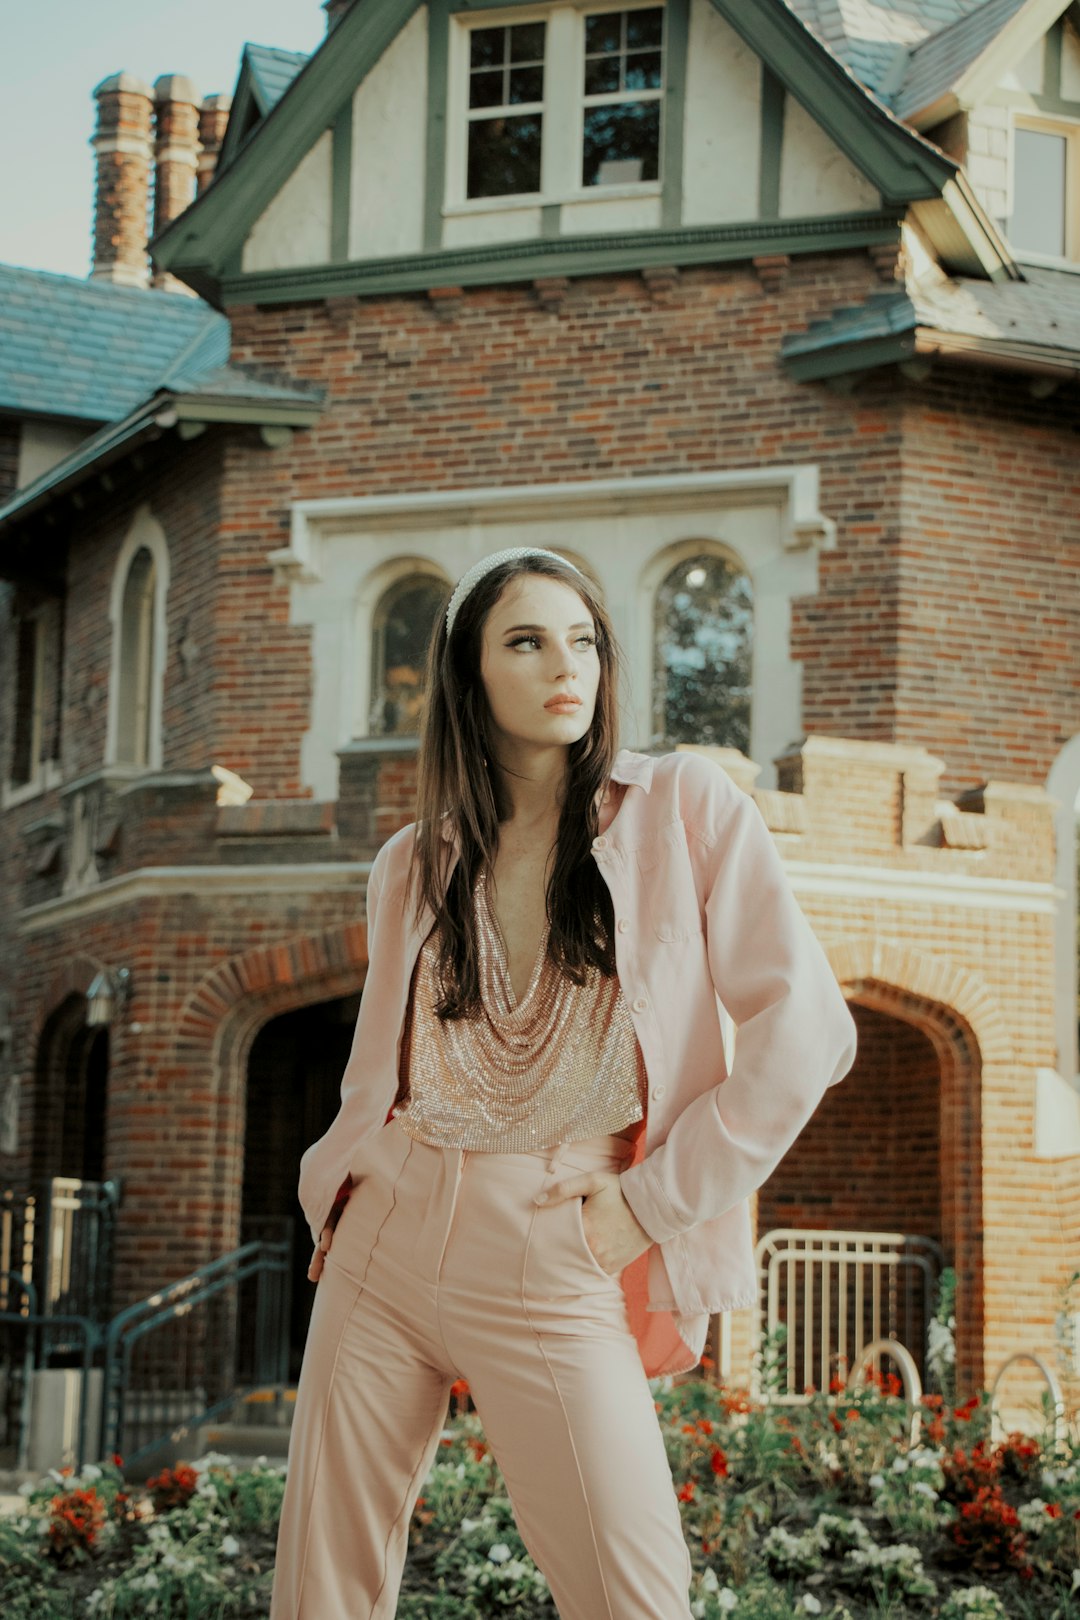 woman in pink long sleeve dress standing near brown brick building during daytime